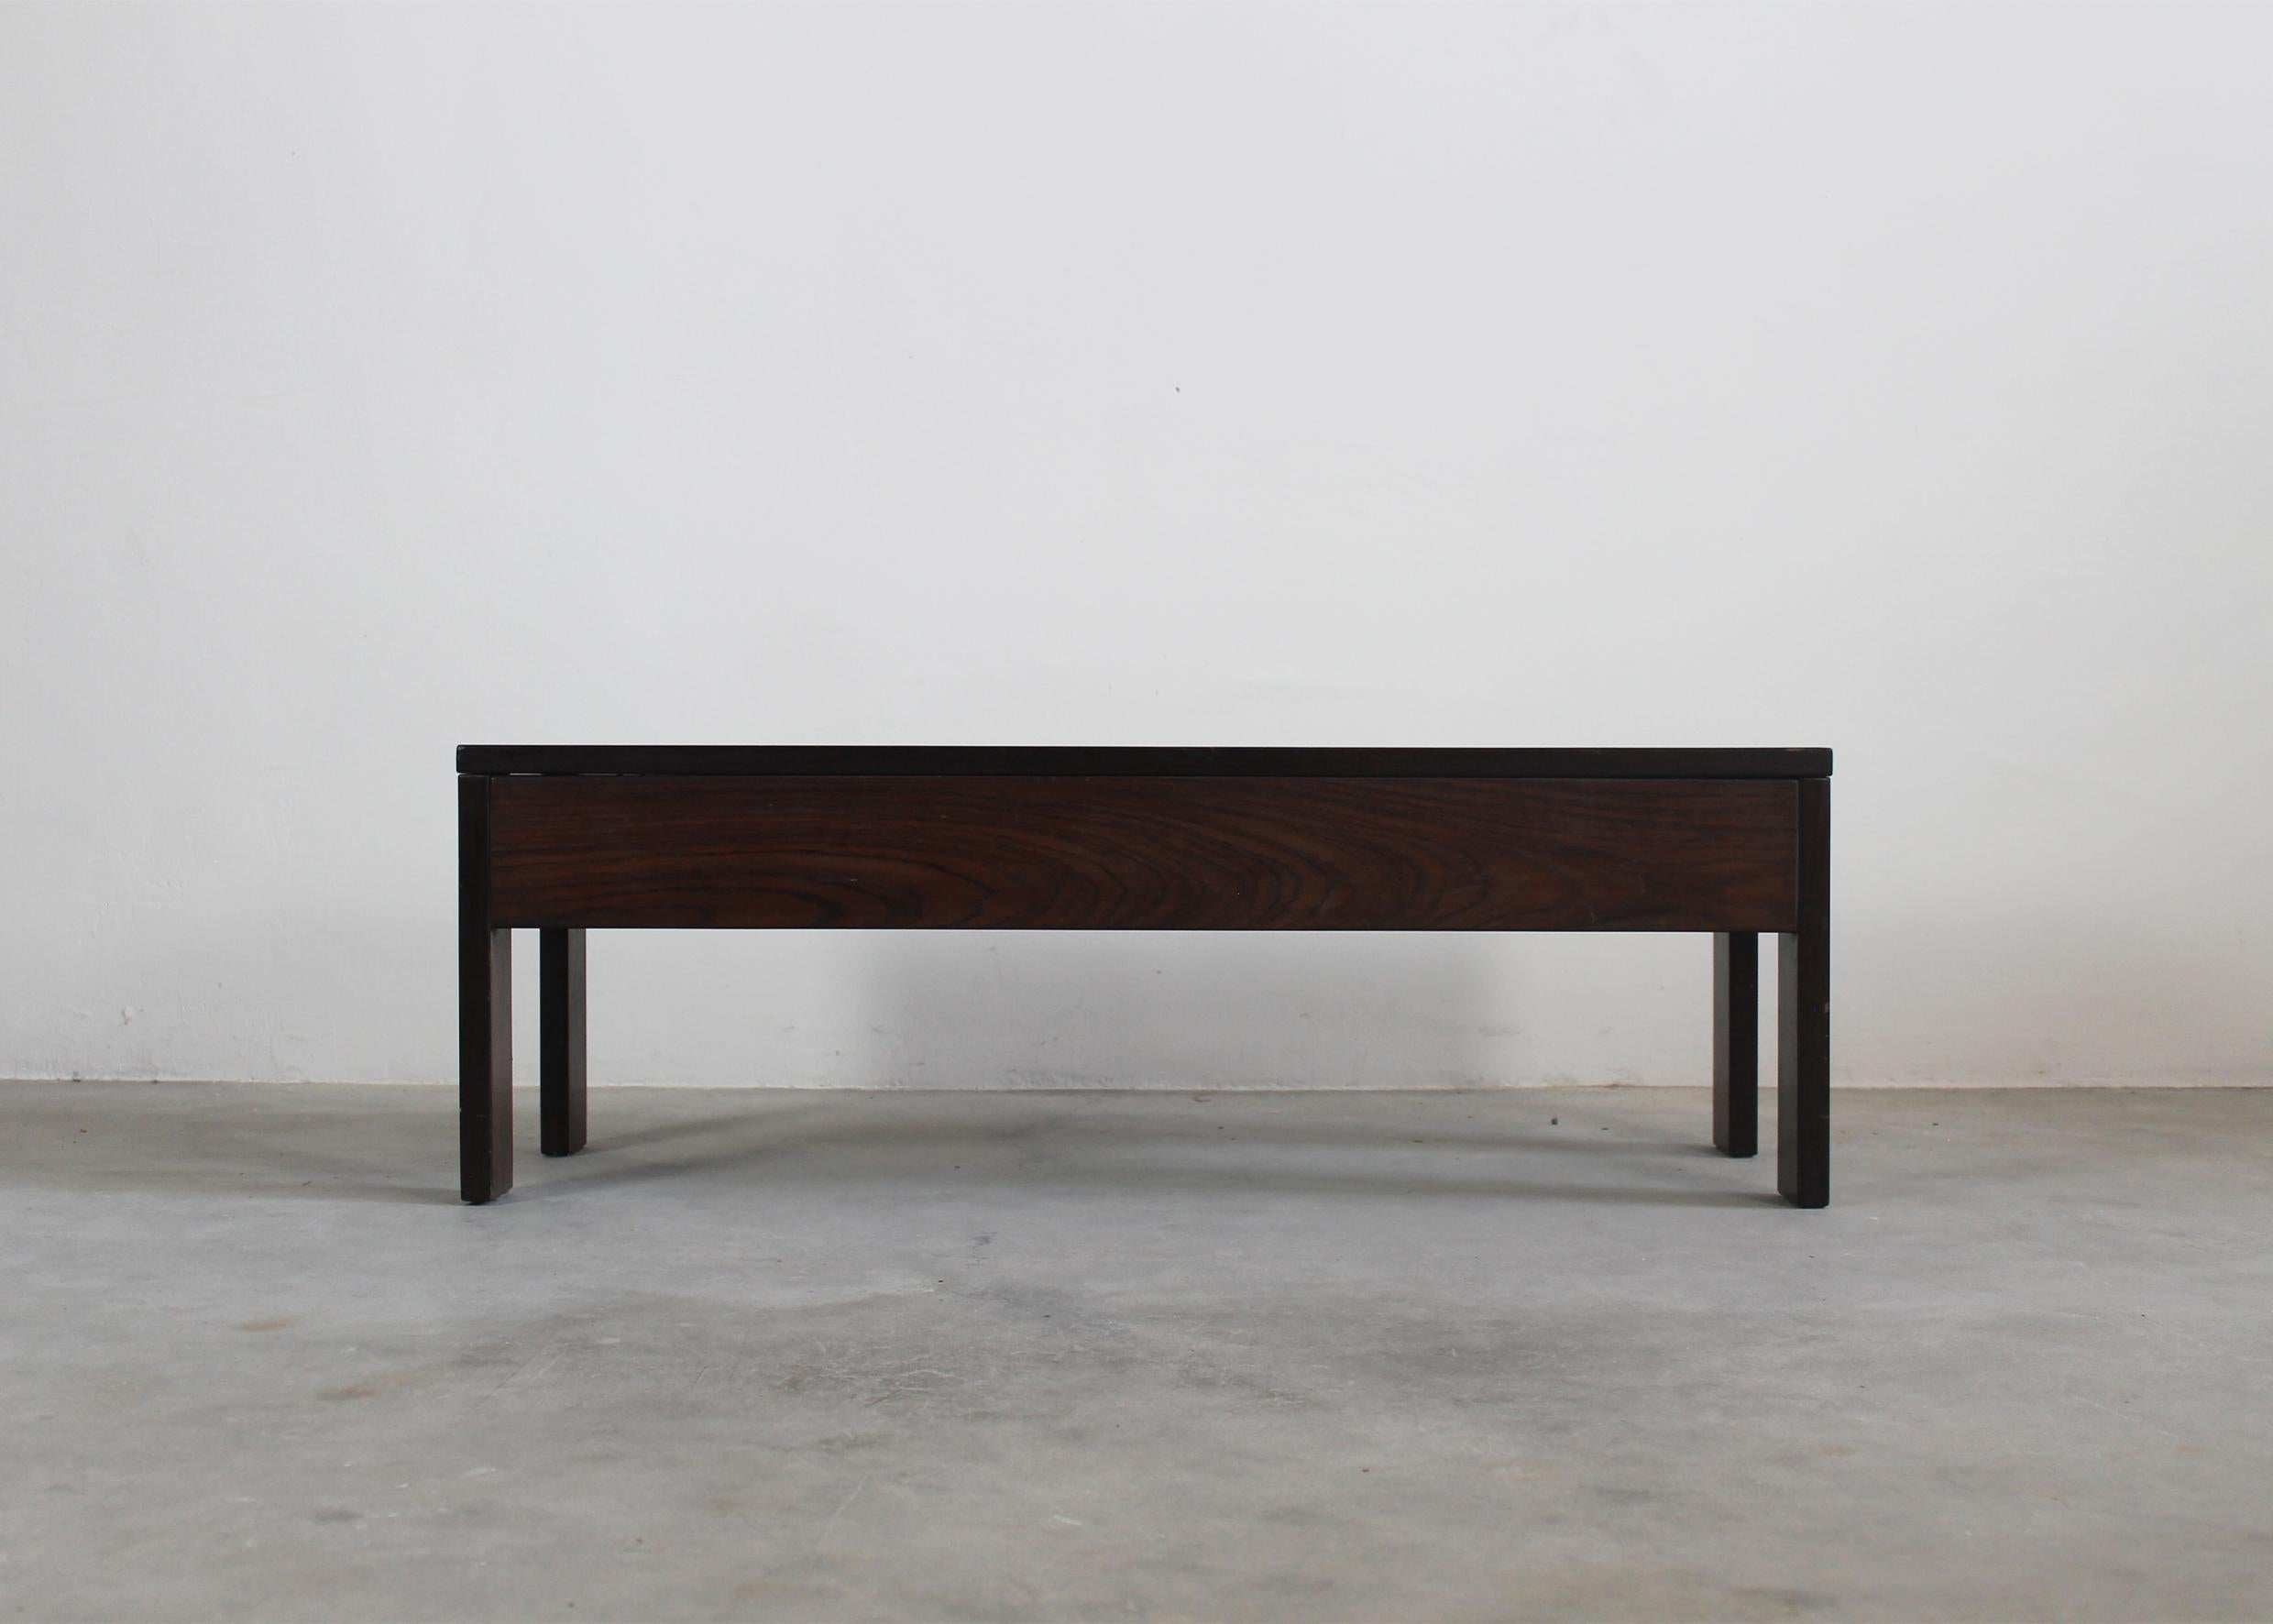 A rectangular low coffee table entirely made in wood, designed by Ettore Sottsass for Poltronova, Agliana 1960s. 

The son of an architect, Ettore Sottsass Jr. (1917-2007) was born in Innsbruck, studied in Turin and graduated from the city’s